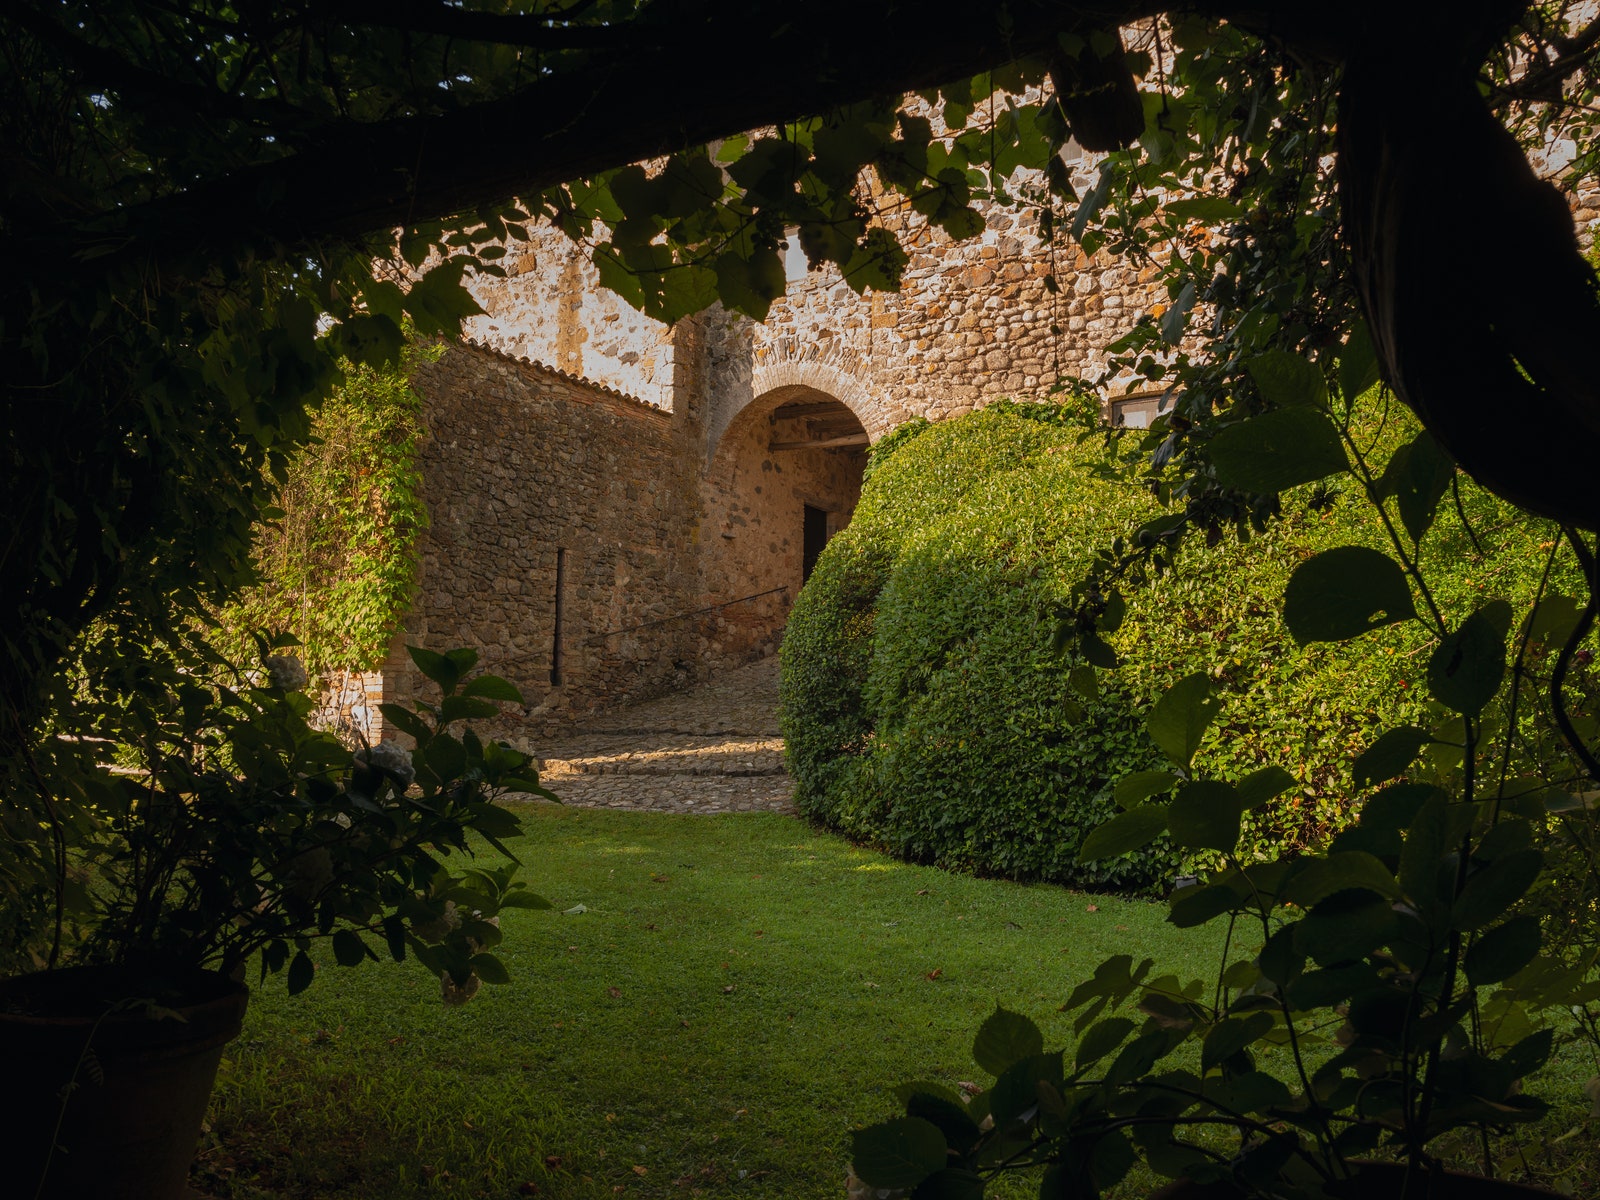 The late Verde Visconti’s home in Umbria is as beautiful as ever